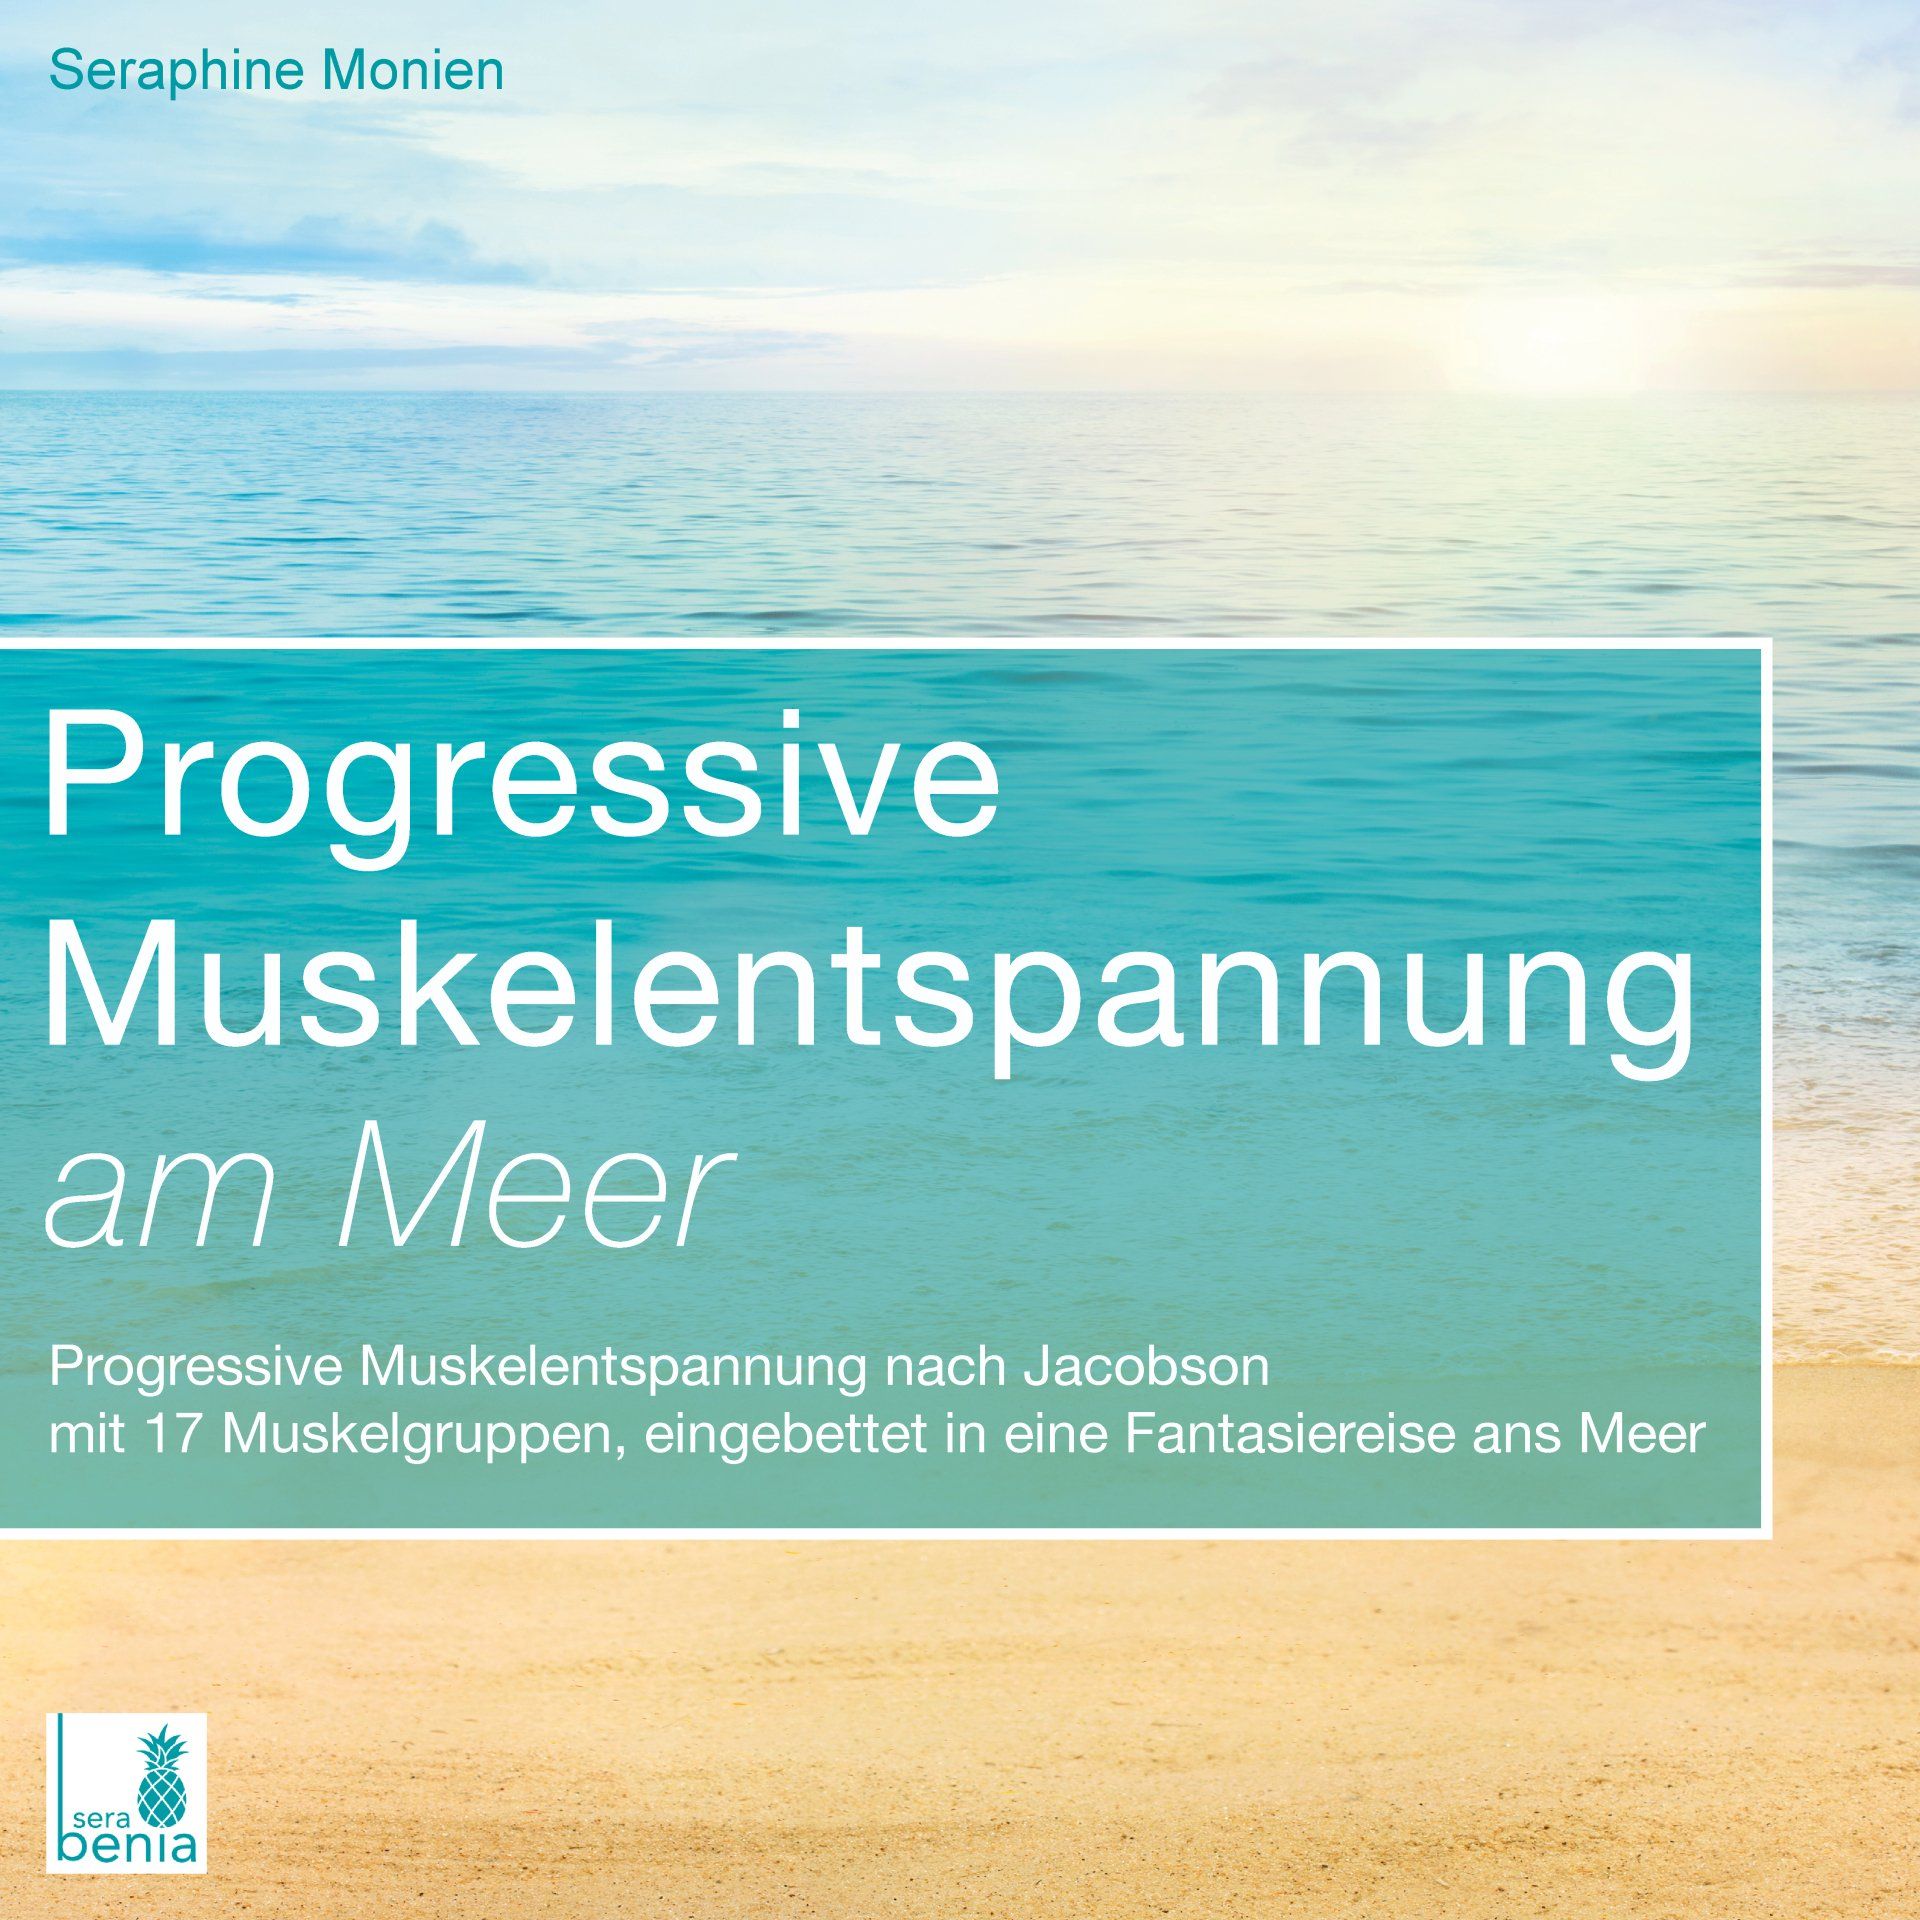 CD cover - Progressive Muskelentspannung am Meer  Progressive Muskelentspannung nach Jacobson mit 17 Muskelgruppen